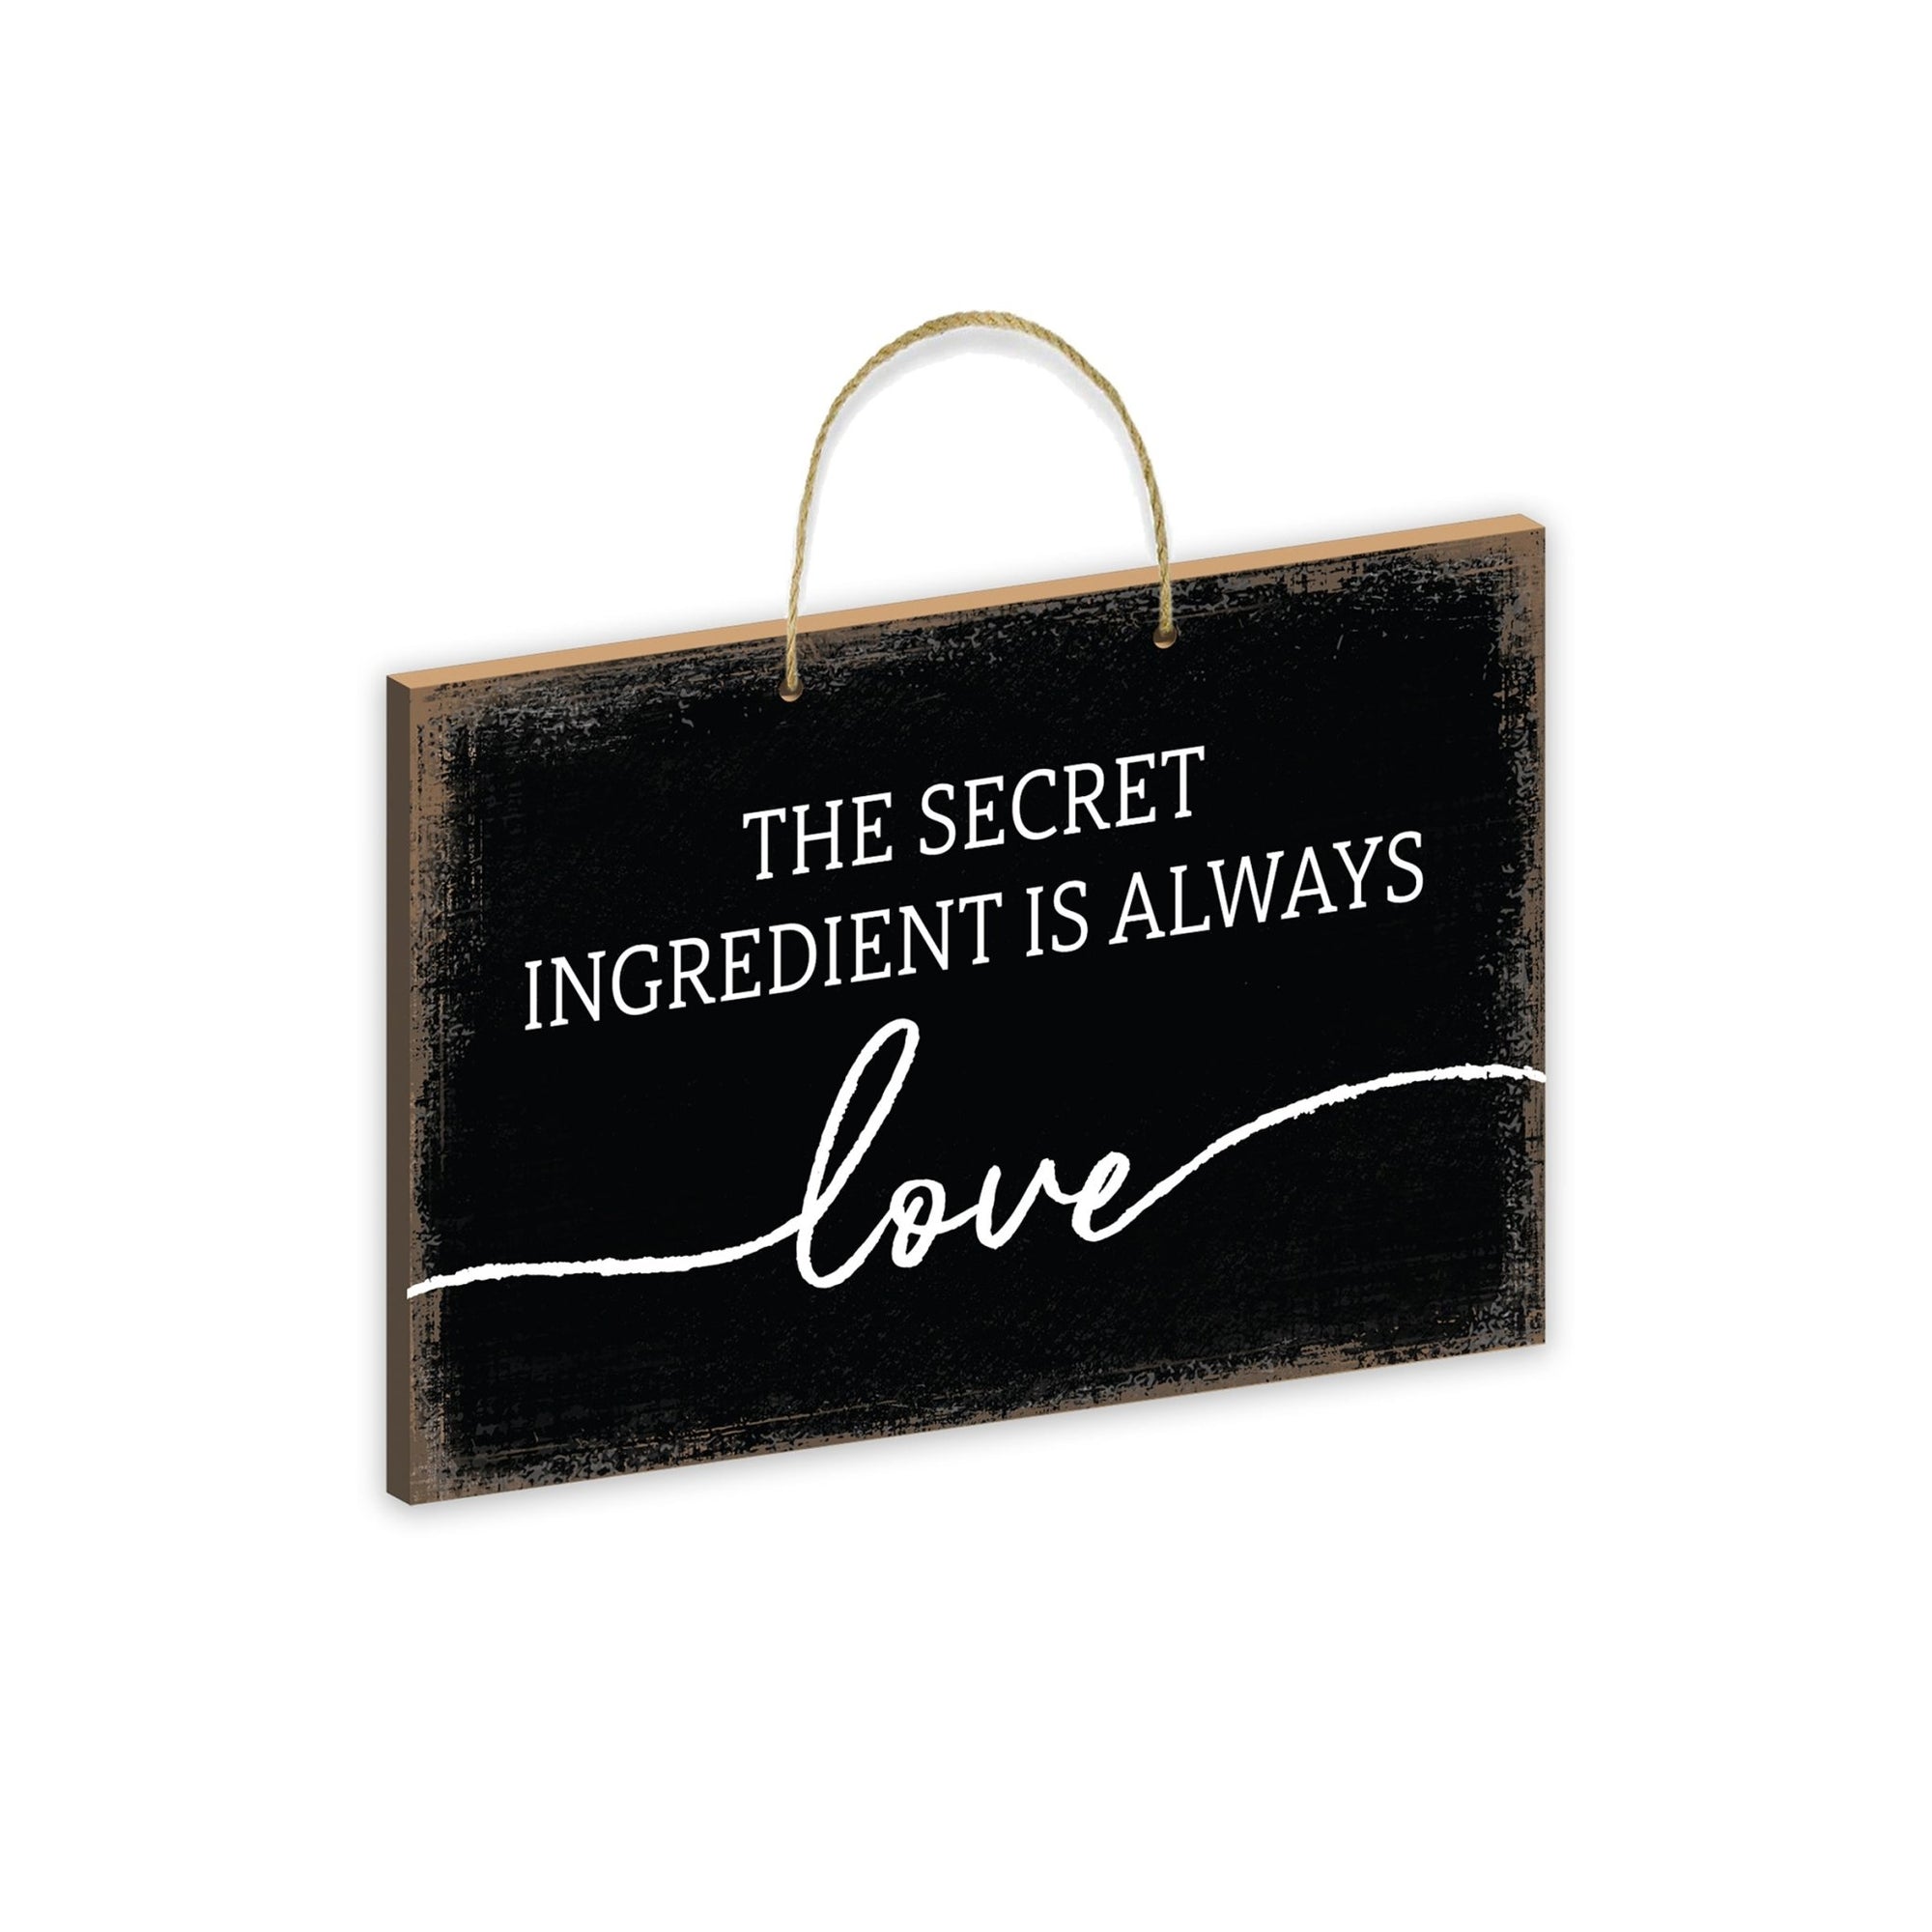 Inspirational Wooden Rustic Wall Hanging Rope Sign Kitchen Home Décor - The Secret Ingredient - LifeSong Milestones